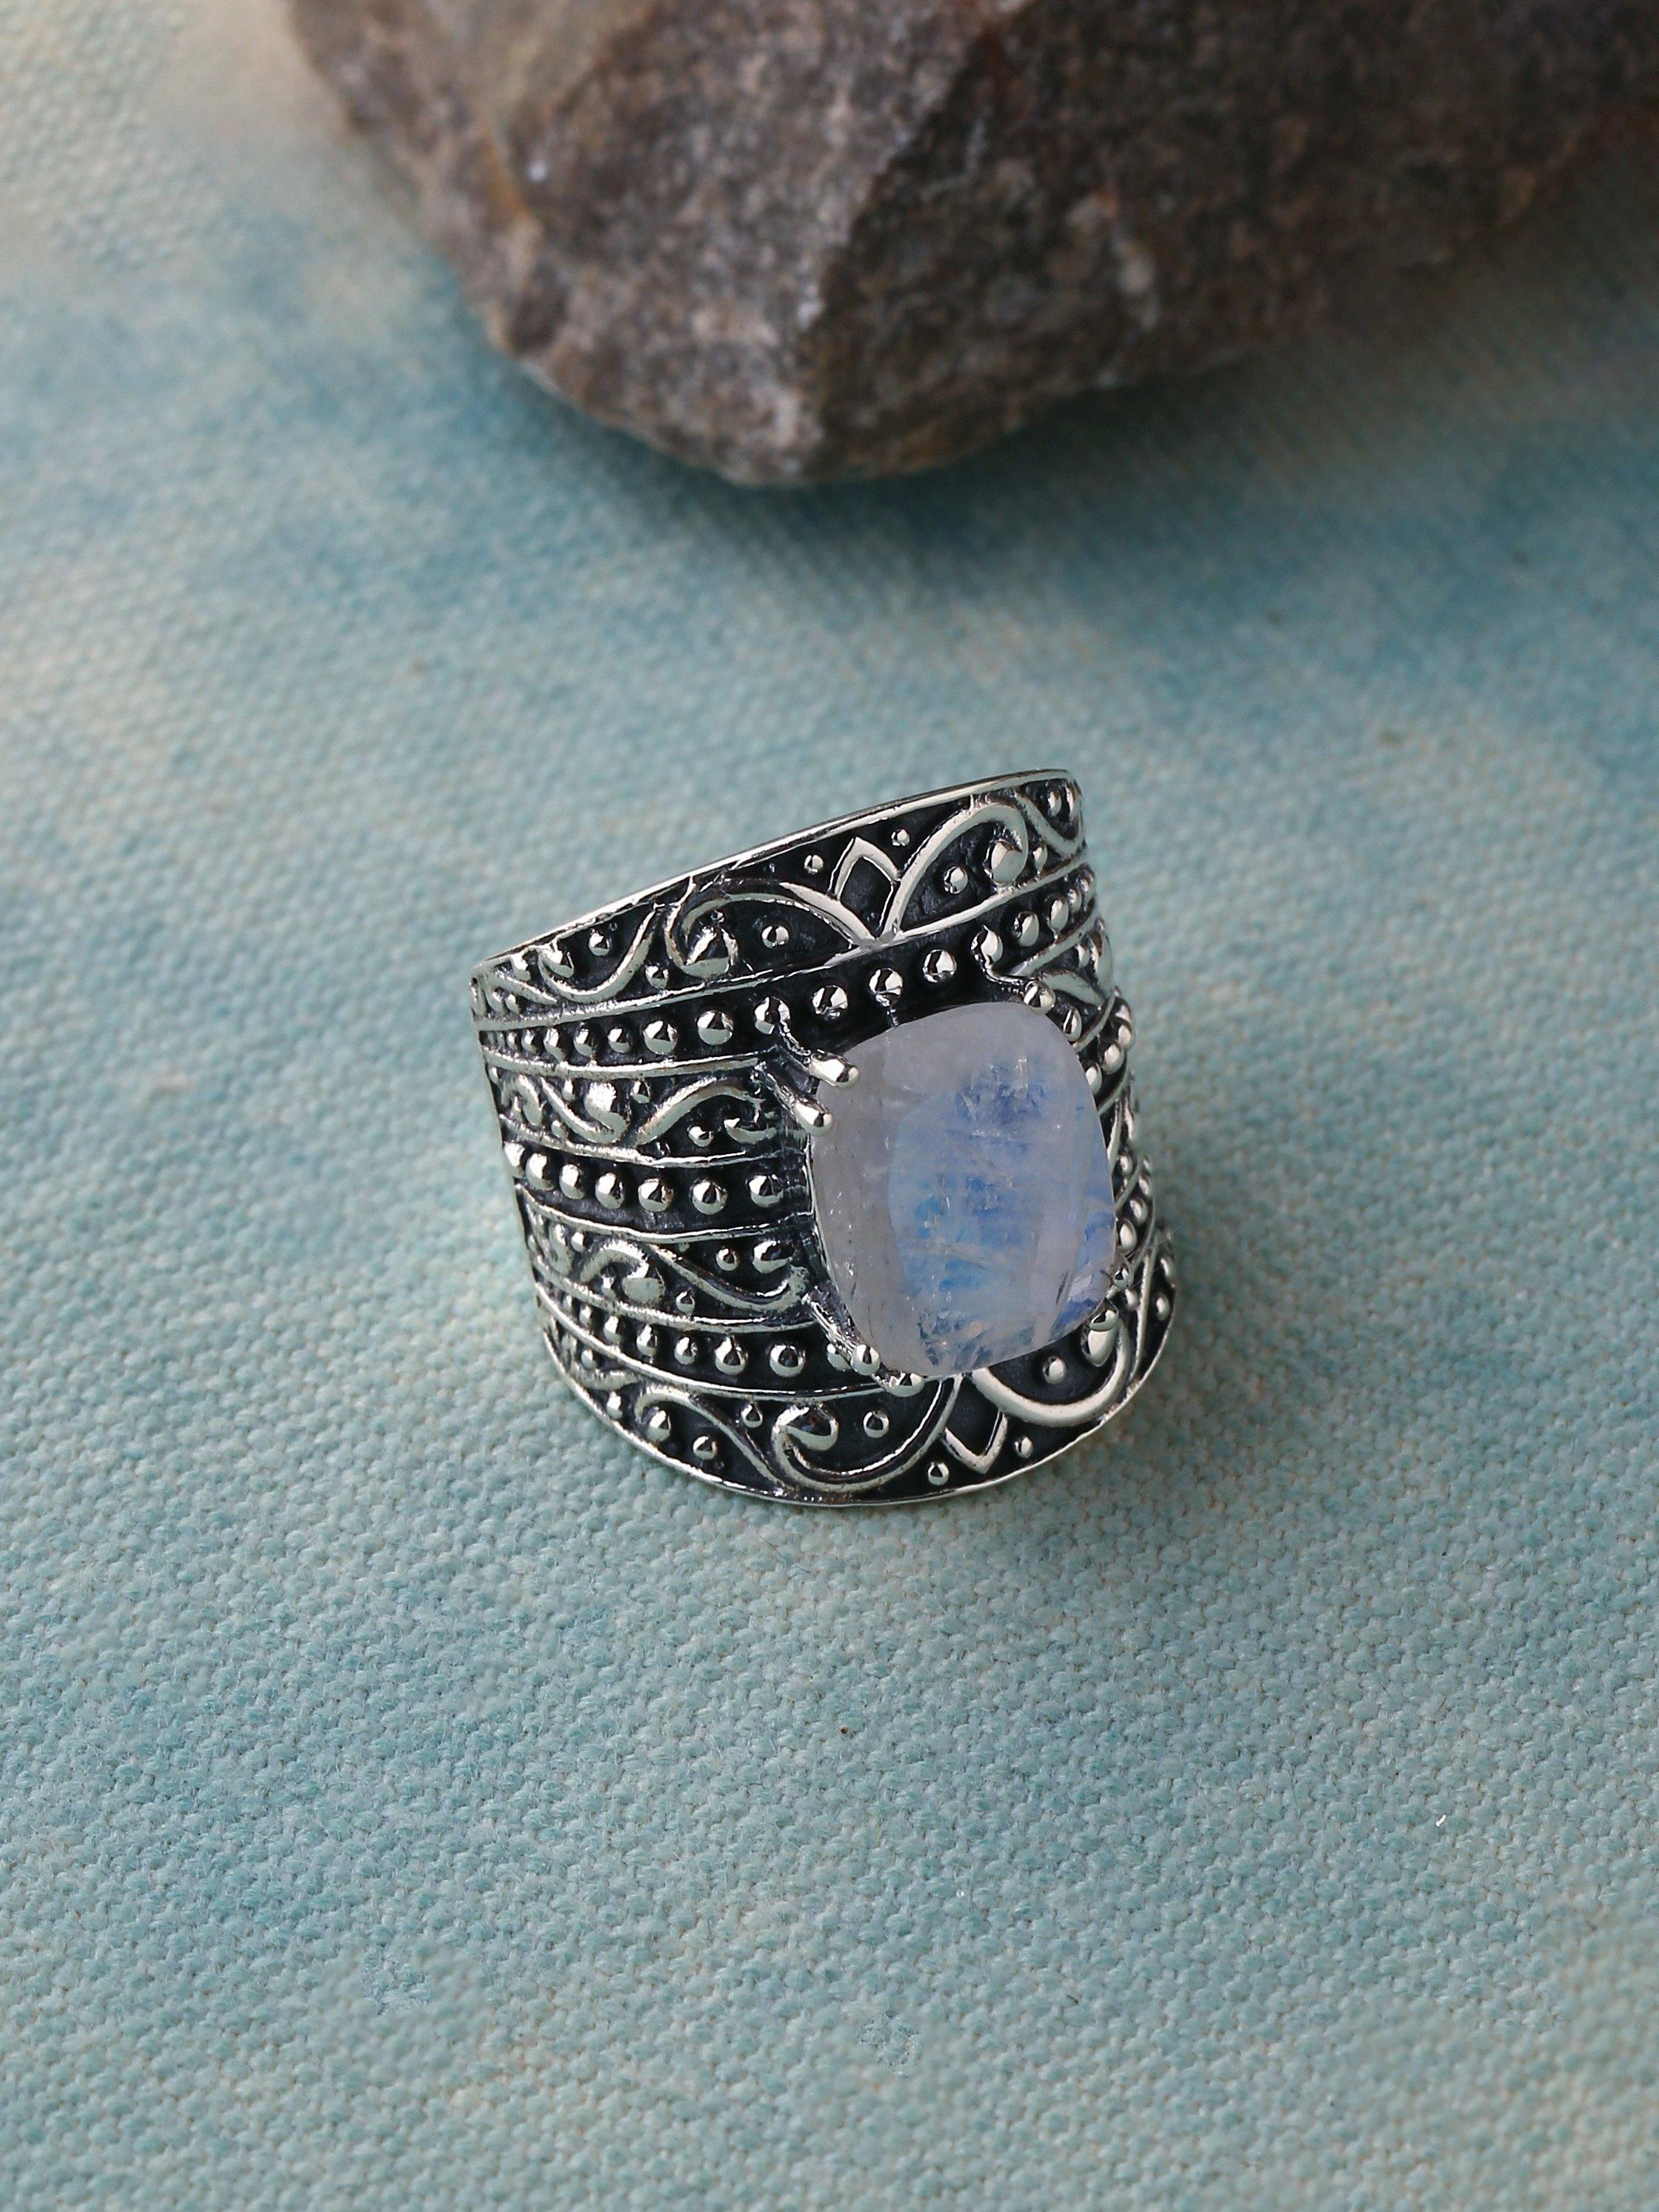 9x11MM Moonstone Ring 925 Sterling Silver Oxidized Wide Band Boho Jewelry - YoTreasure